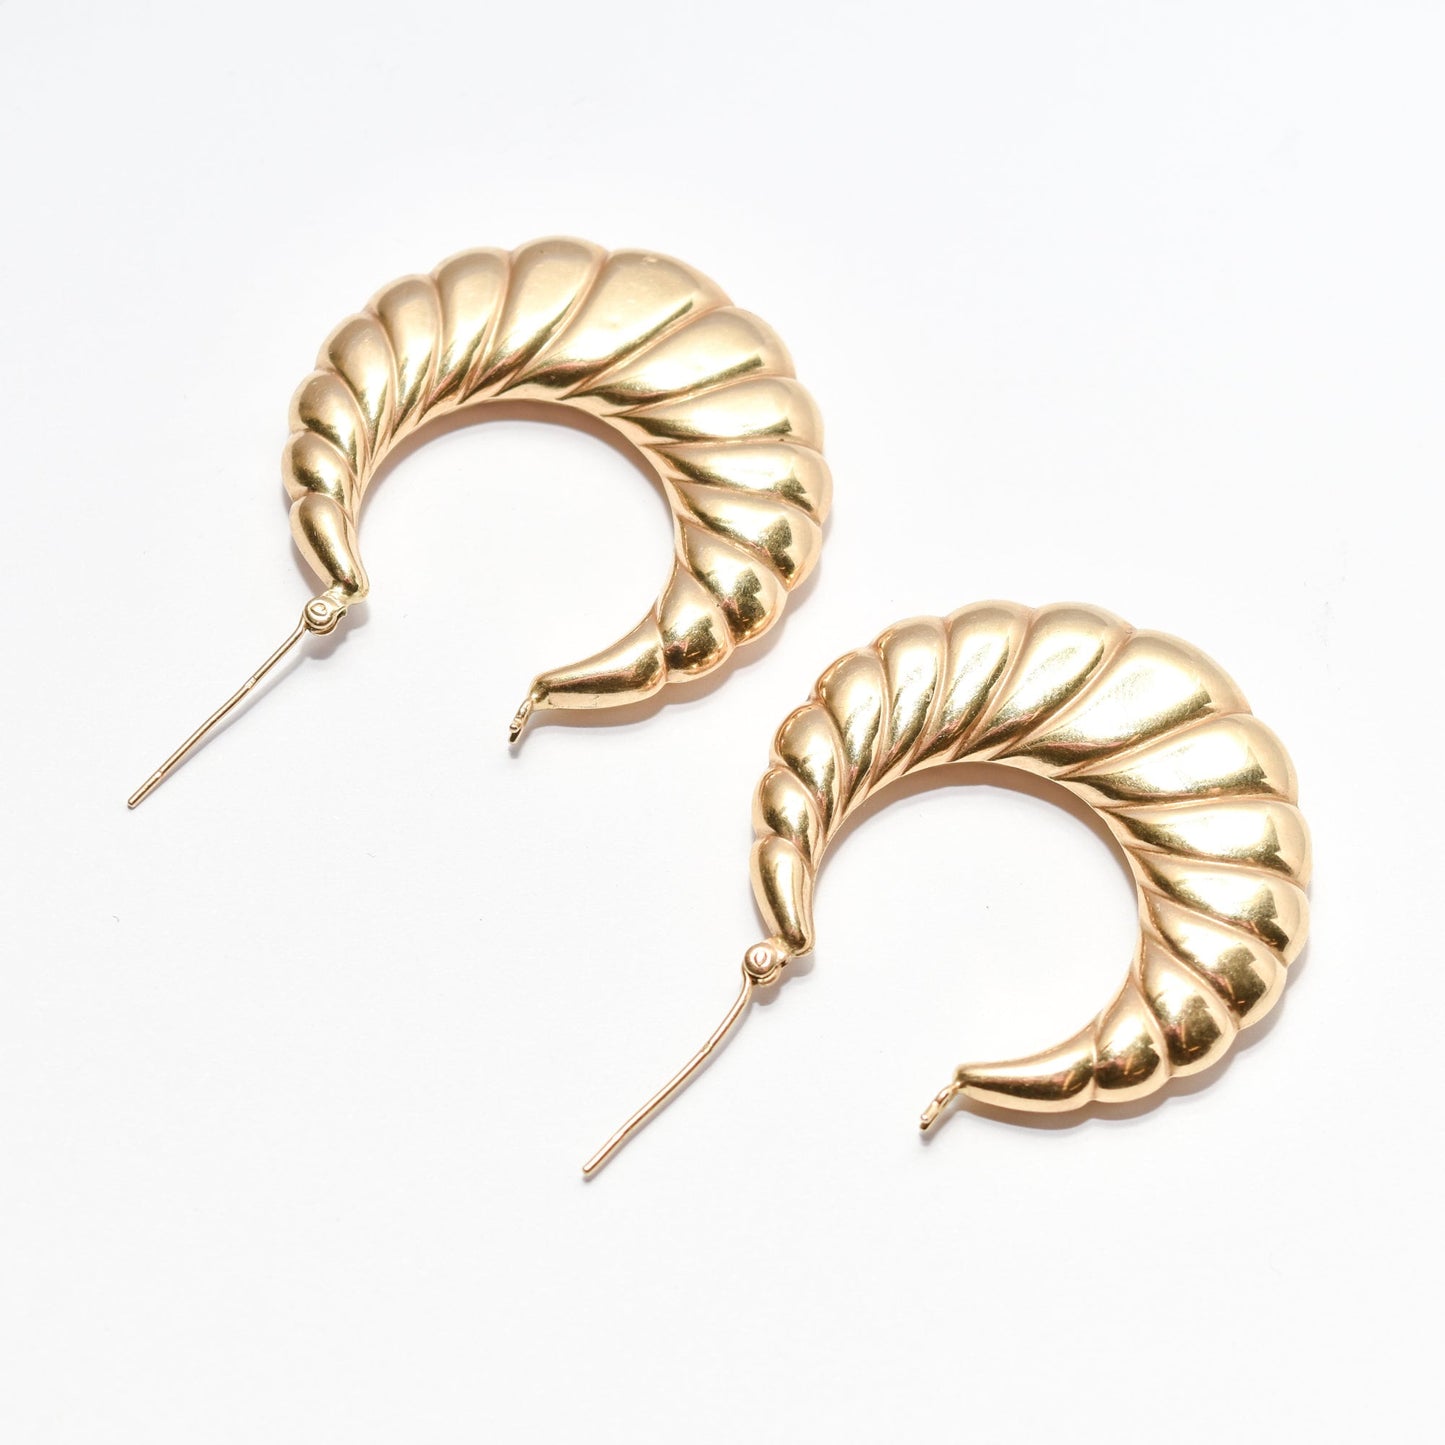 MCM 14K gold puffed scallop hoop earrings, medium-sized 36mm, estate jewelry on a white background.